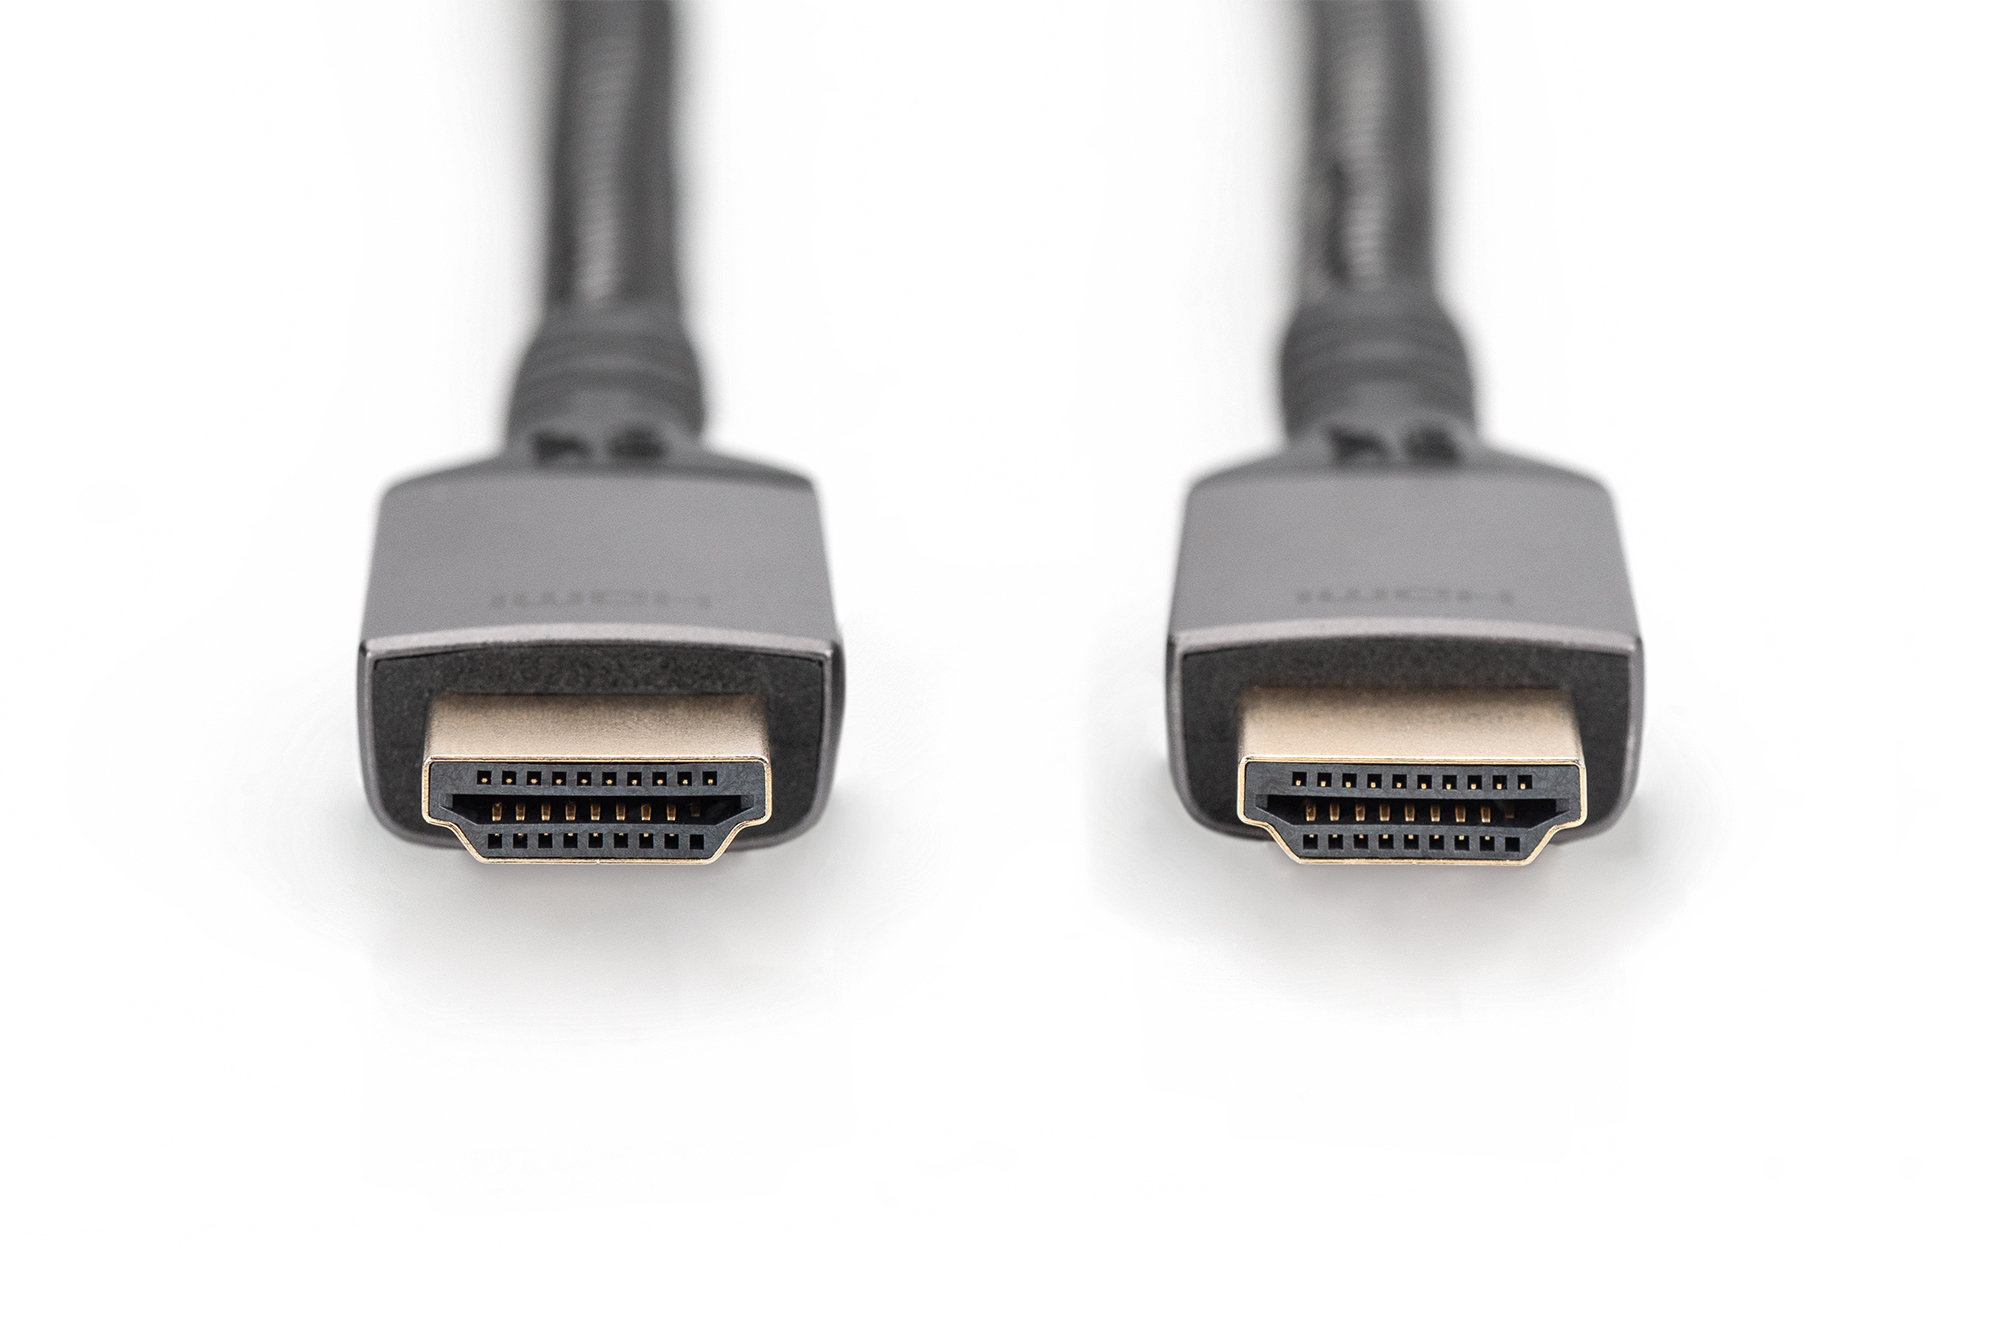 HDMI Type A ferrite cable for 8K Ultra HD resolution